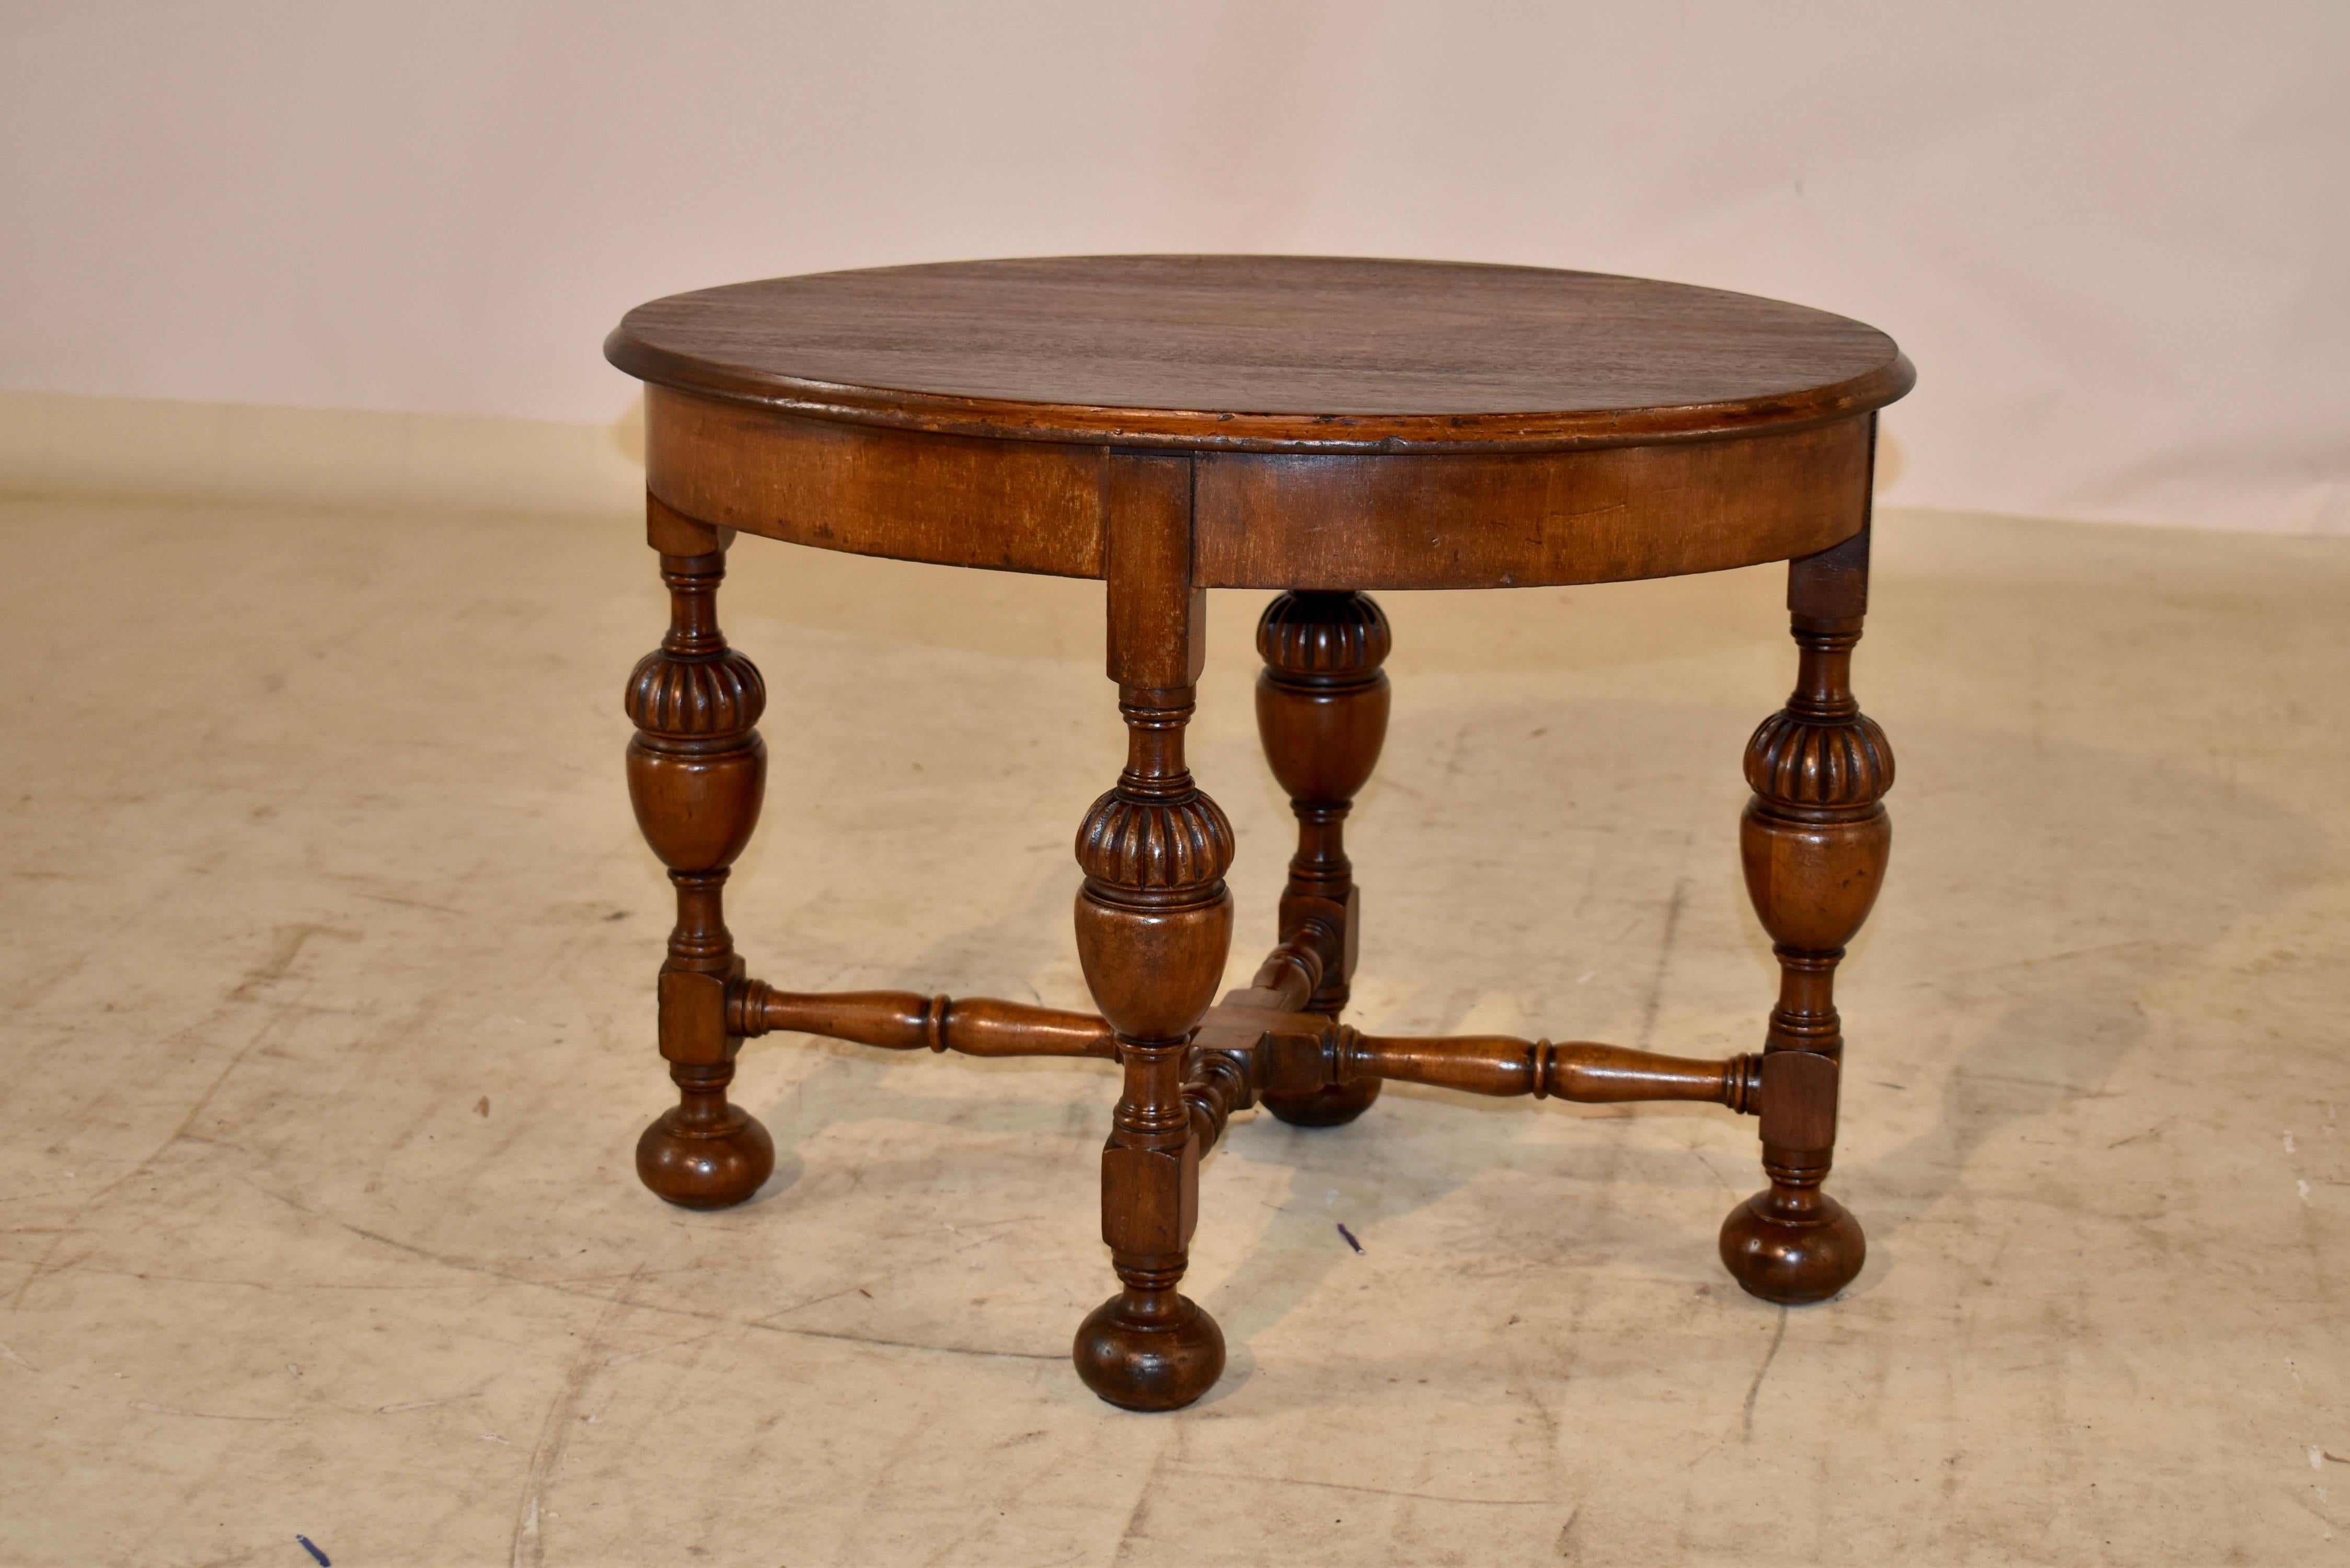 Edwardian walnut small cocktail/coffee table from England. The top has lovely graining and a beveled edge over a simple apron. The table is a lovely oval shape and is supported on hand turned legs with bulbous turnings for added design interest. The